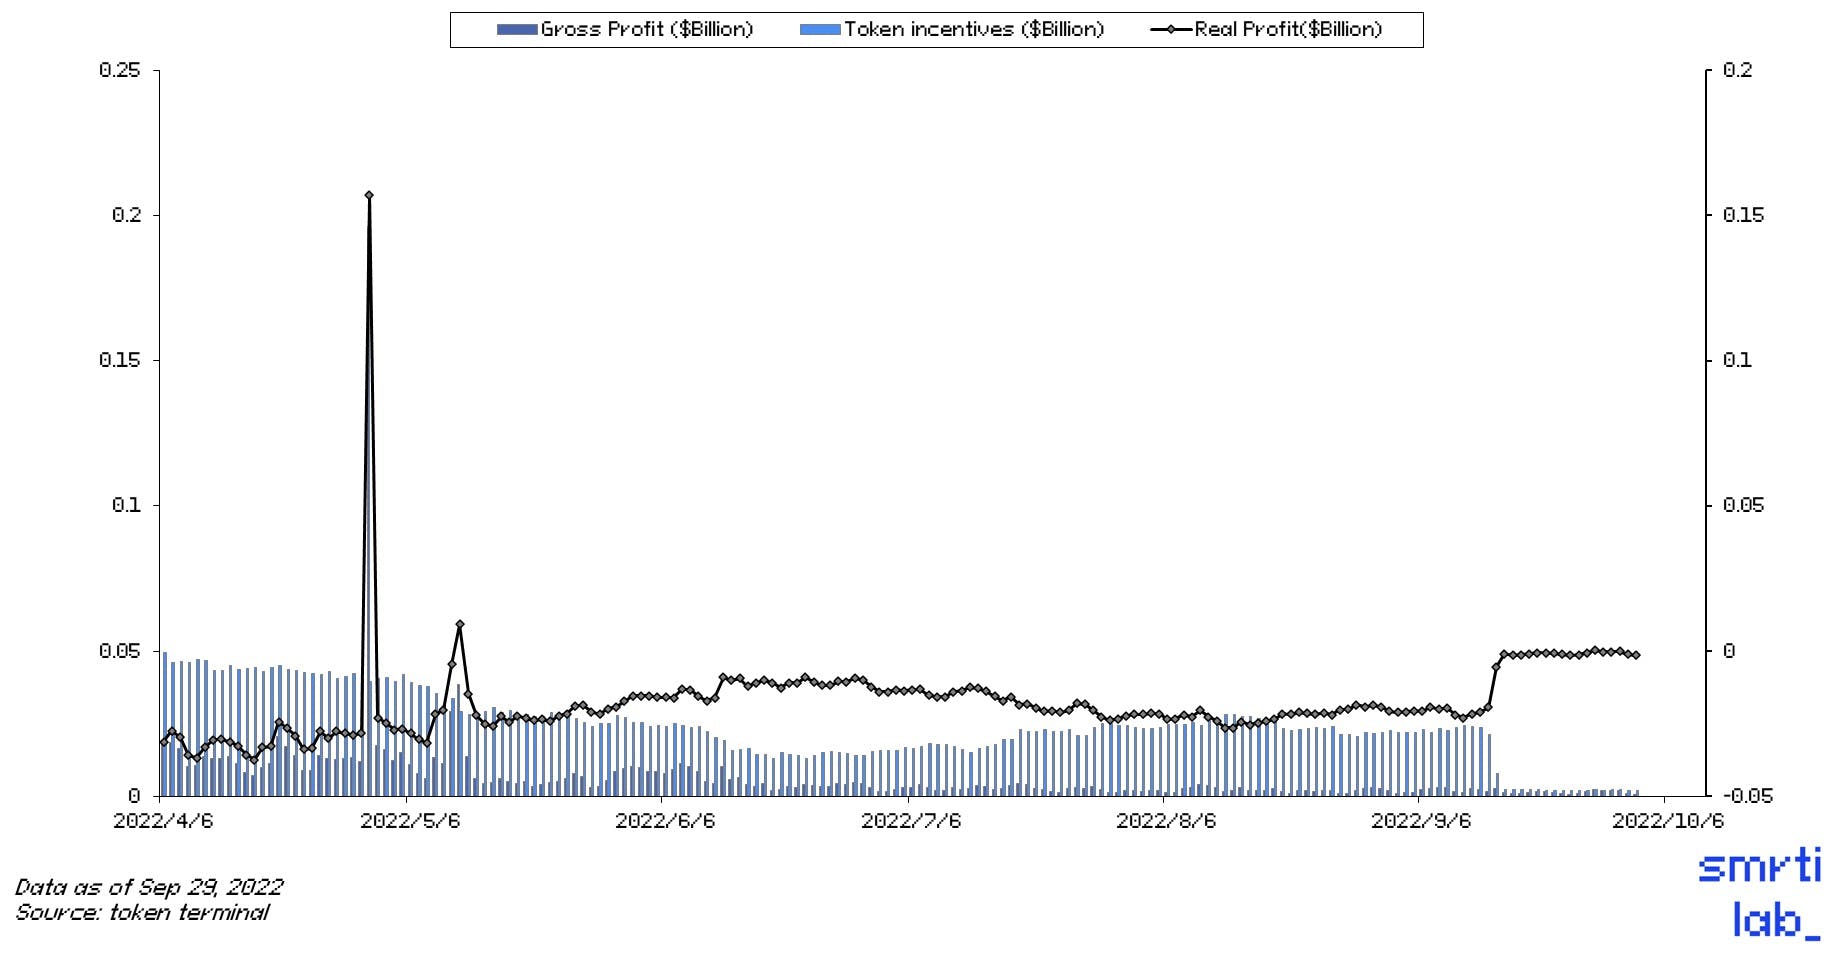 Figure 11. Ethereum Real Profit: Before and After the Merge